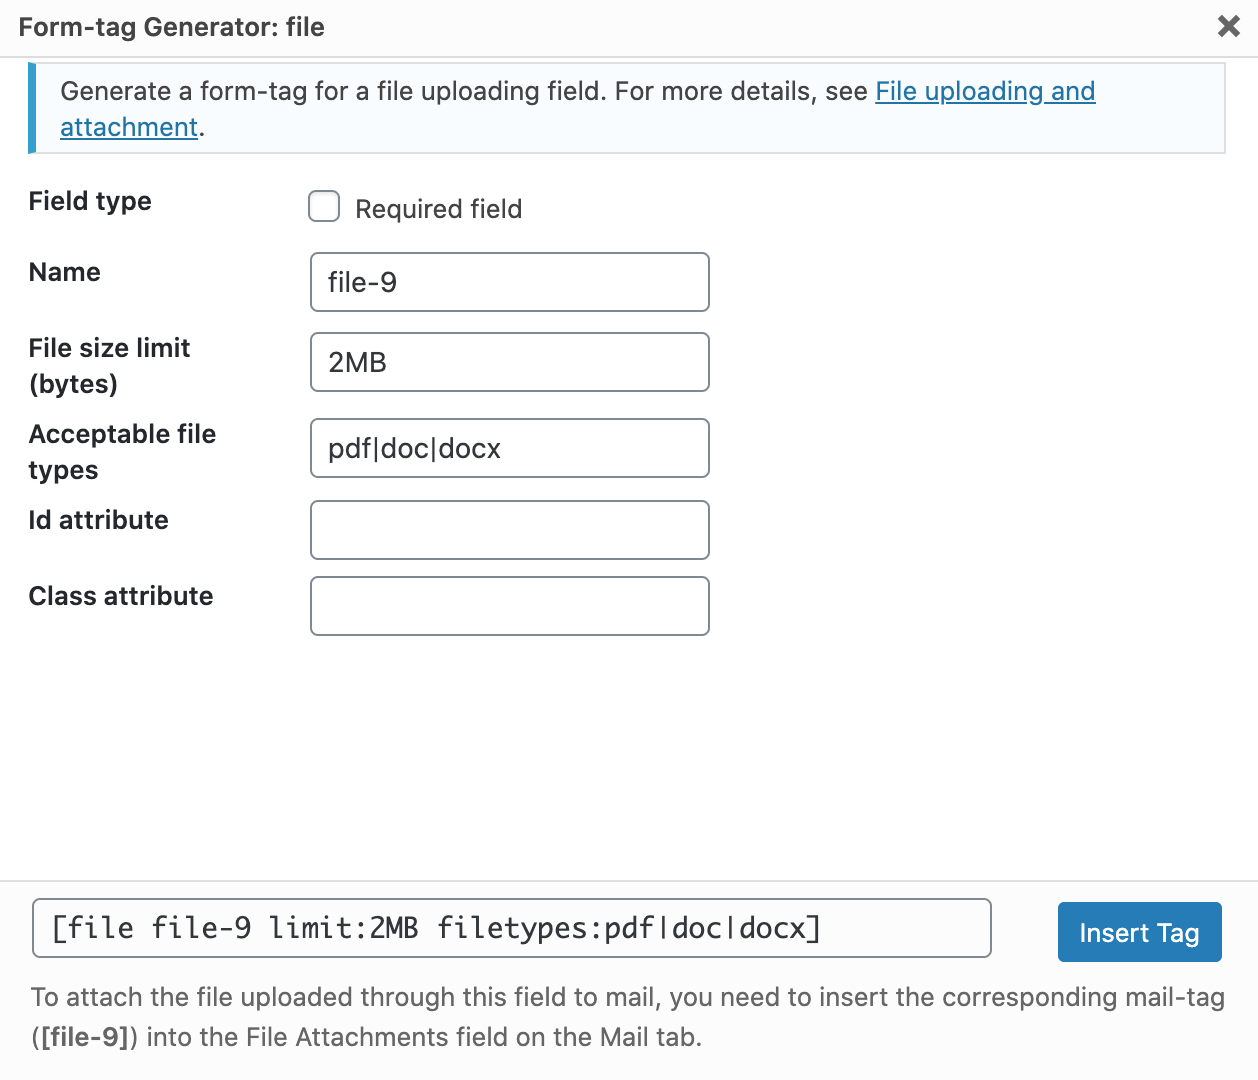 Form-tag Generator file on contact form 7